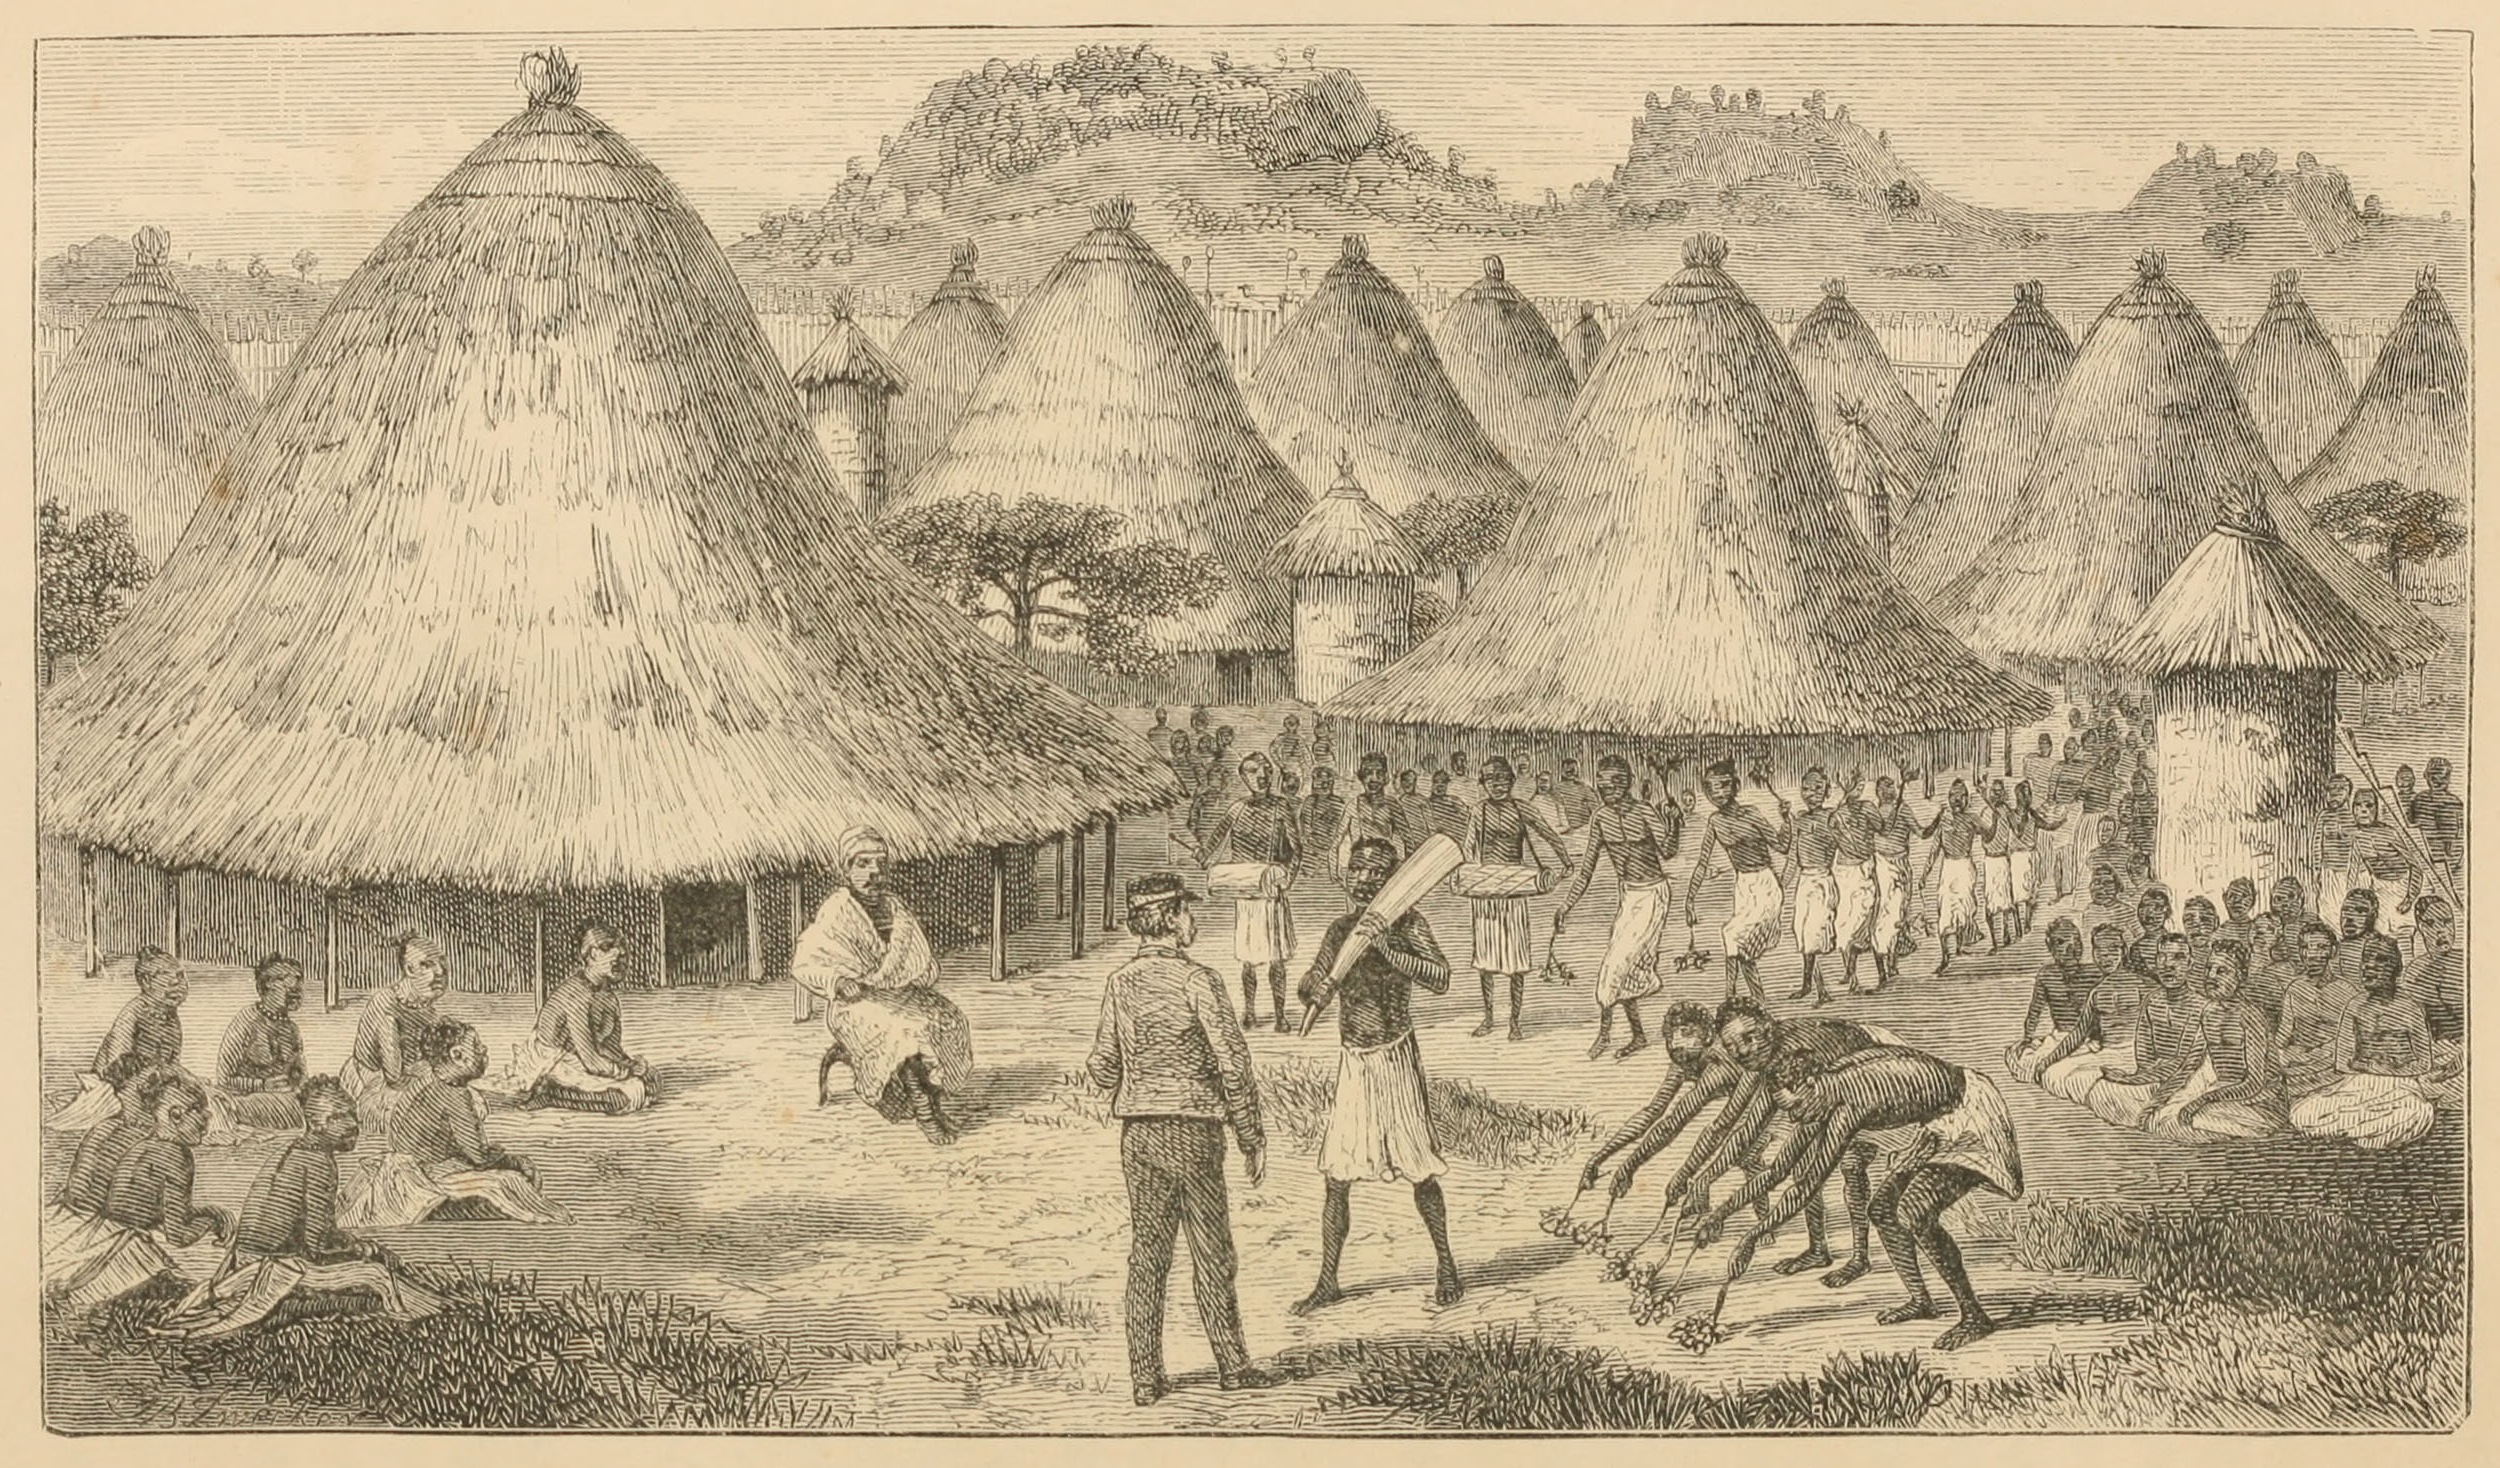 Chitapangwe Receiving Dr. Livingstone. Illustration from the Last Journals (Livingstone 1874,1:opposite 185). Courtesy of Internet Archive